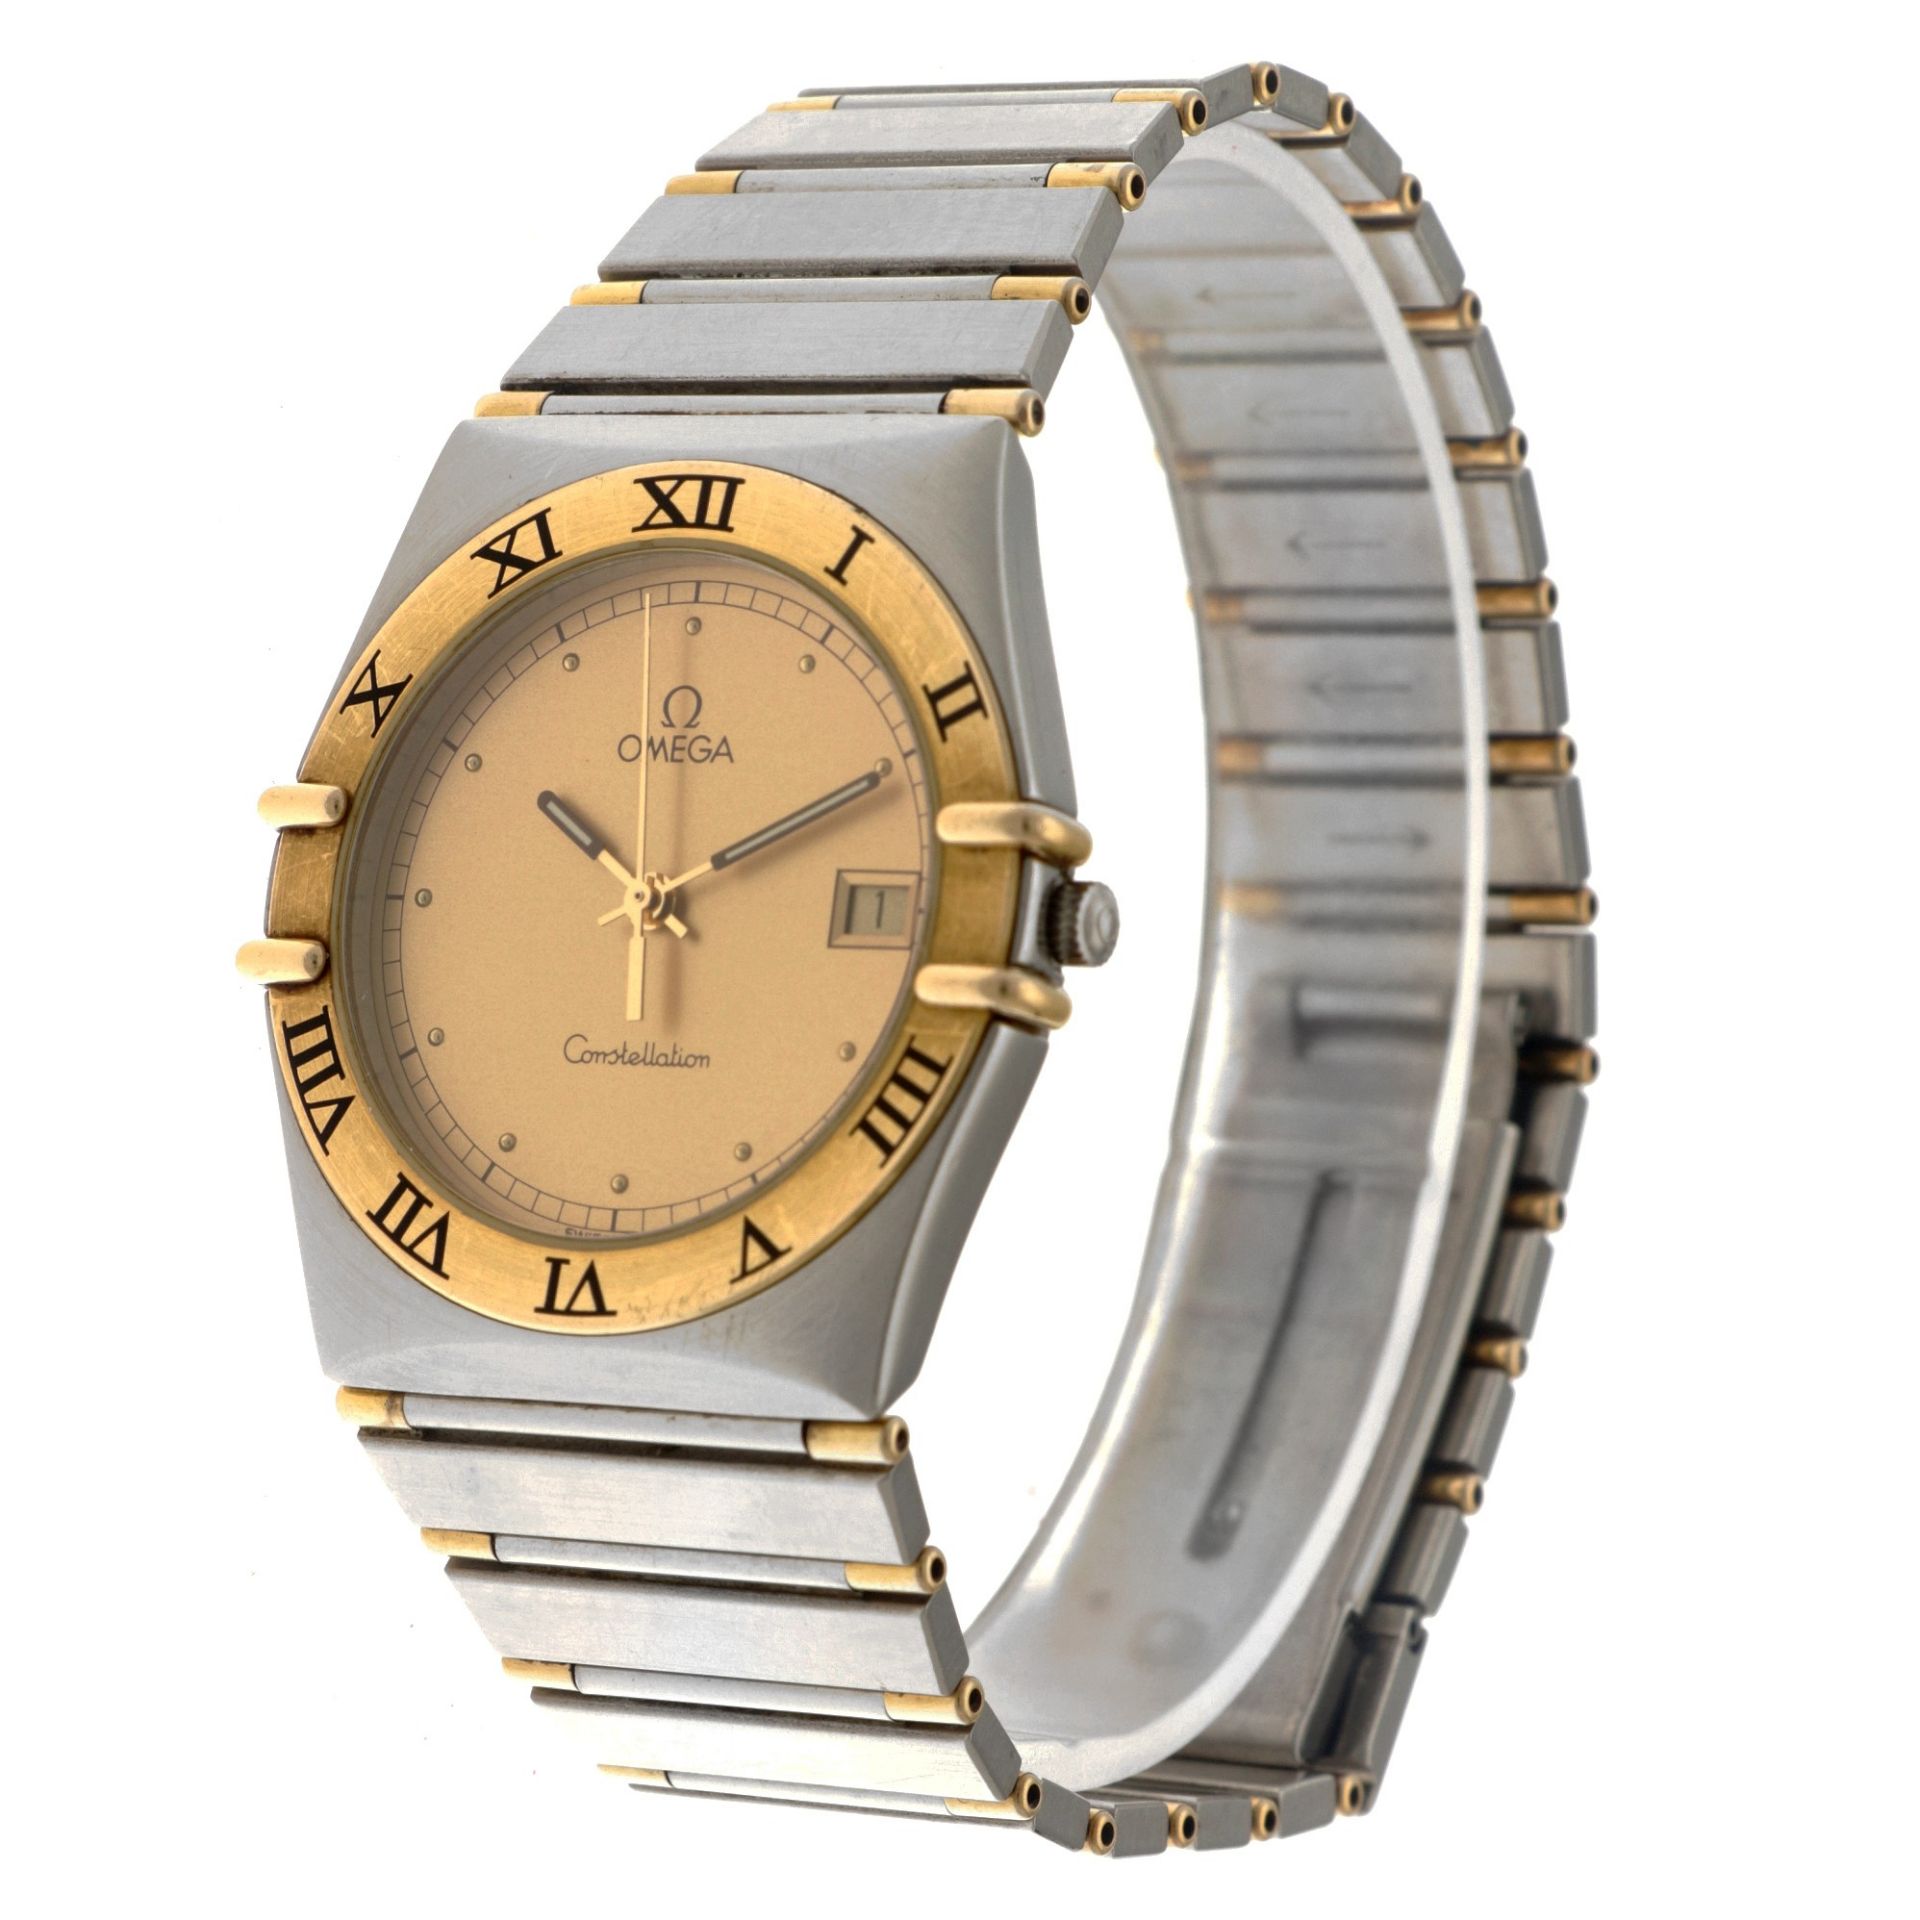 No Reserve - Omega Constellation 3961070 - Men's watch - approx. 1989. - Image 2 of 5